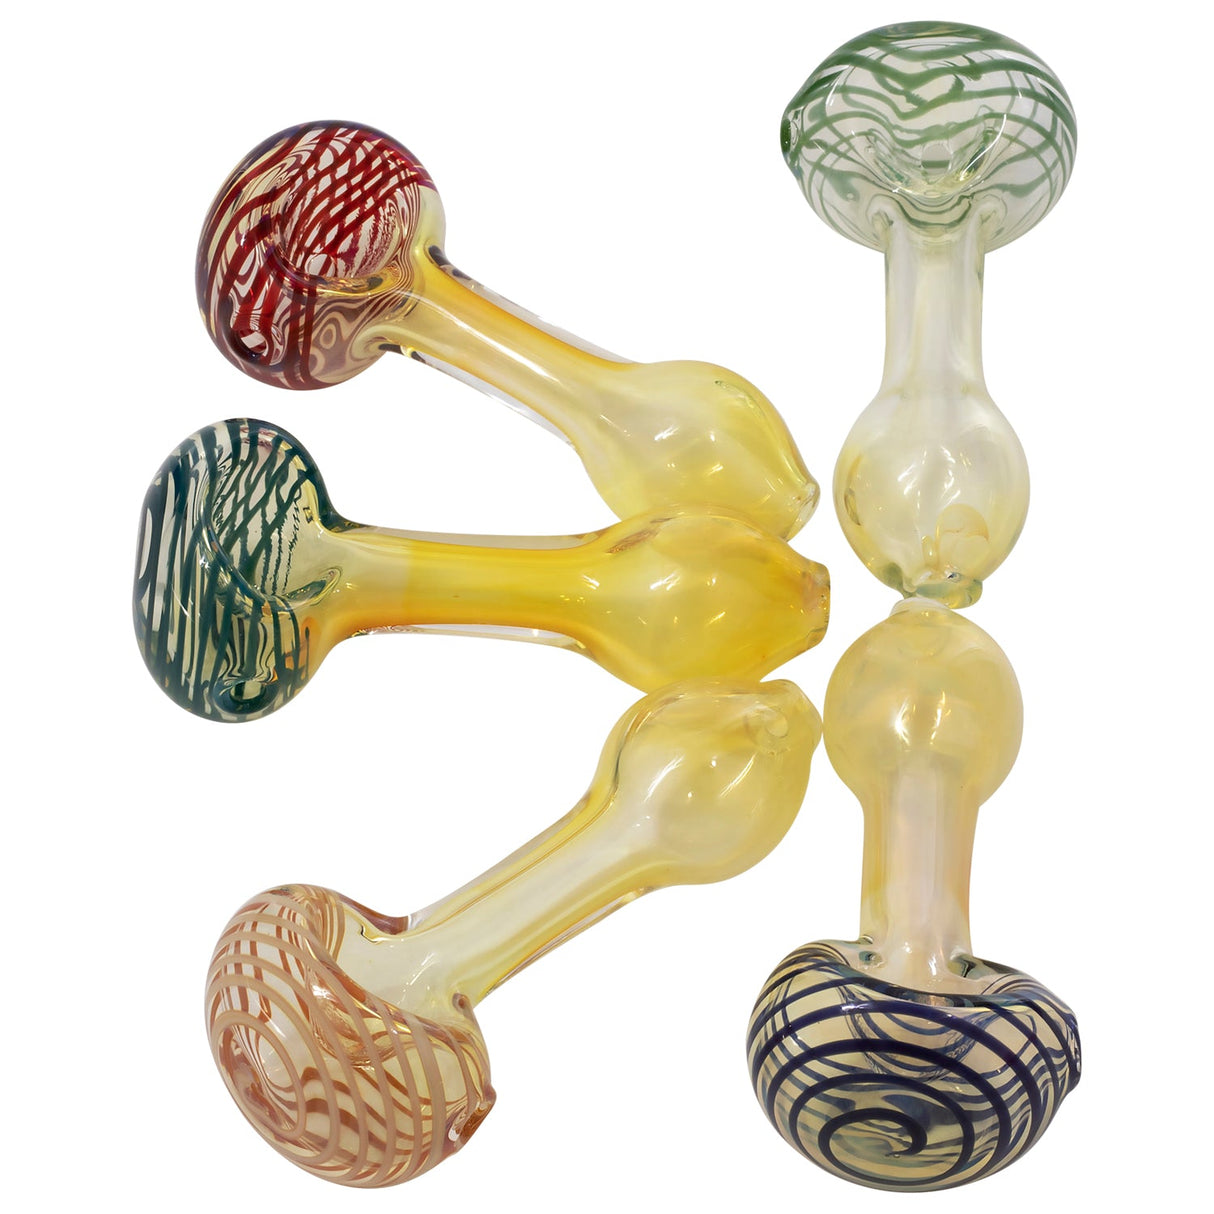 LA Pipes Spiral-Head Color Changing Glass Spoon Pipes in a group shot on white background